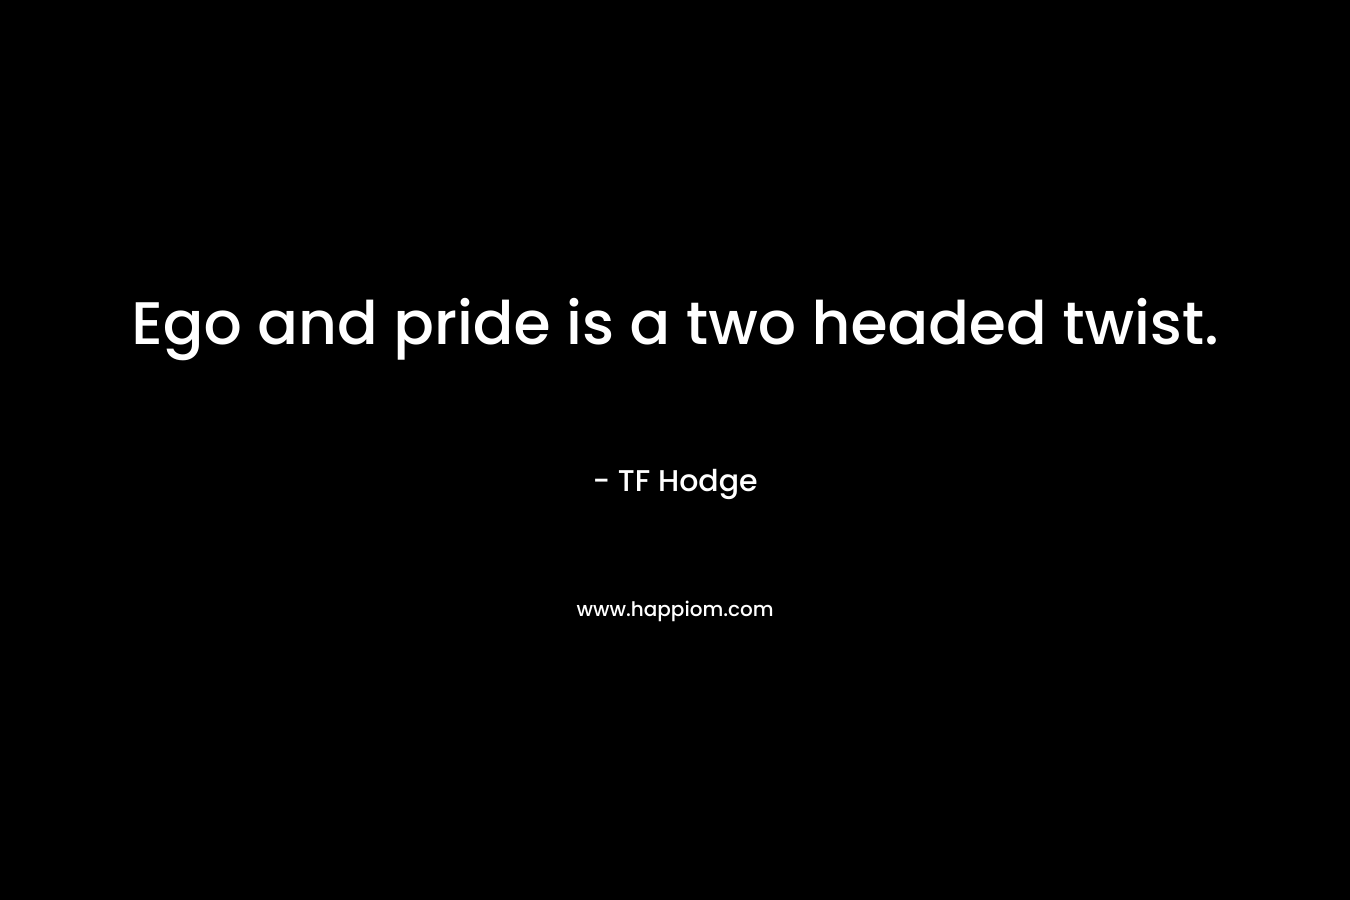 Ego and pride is a two headed twist. – TF Hodge